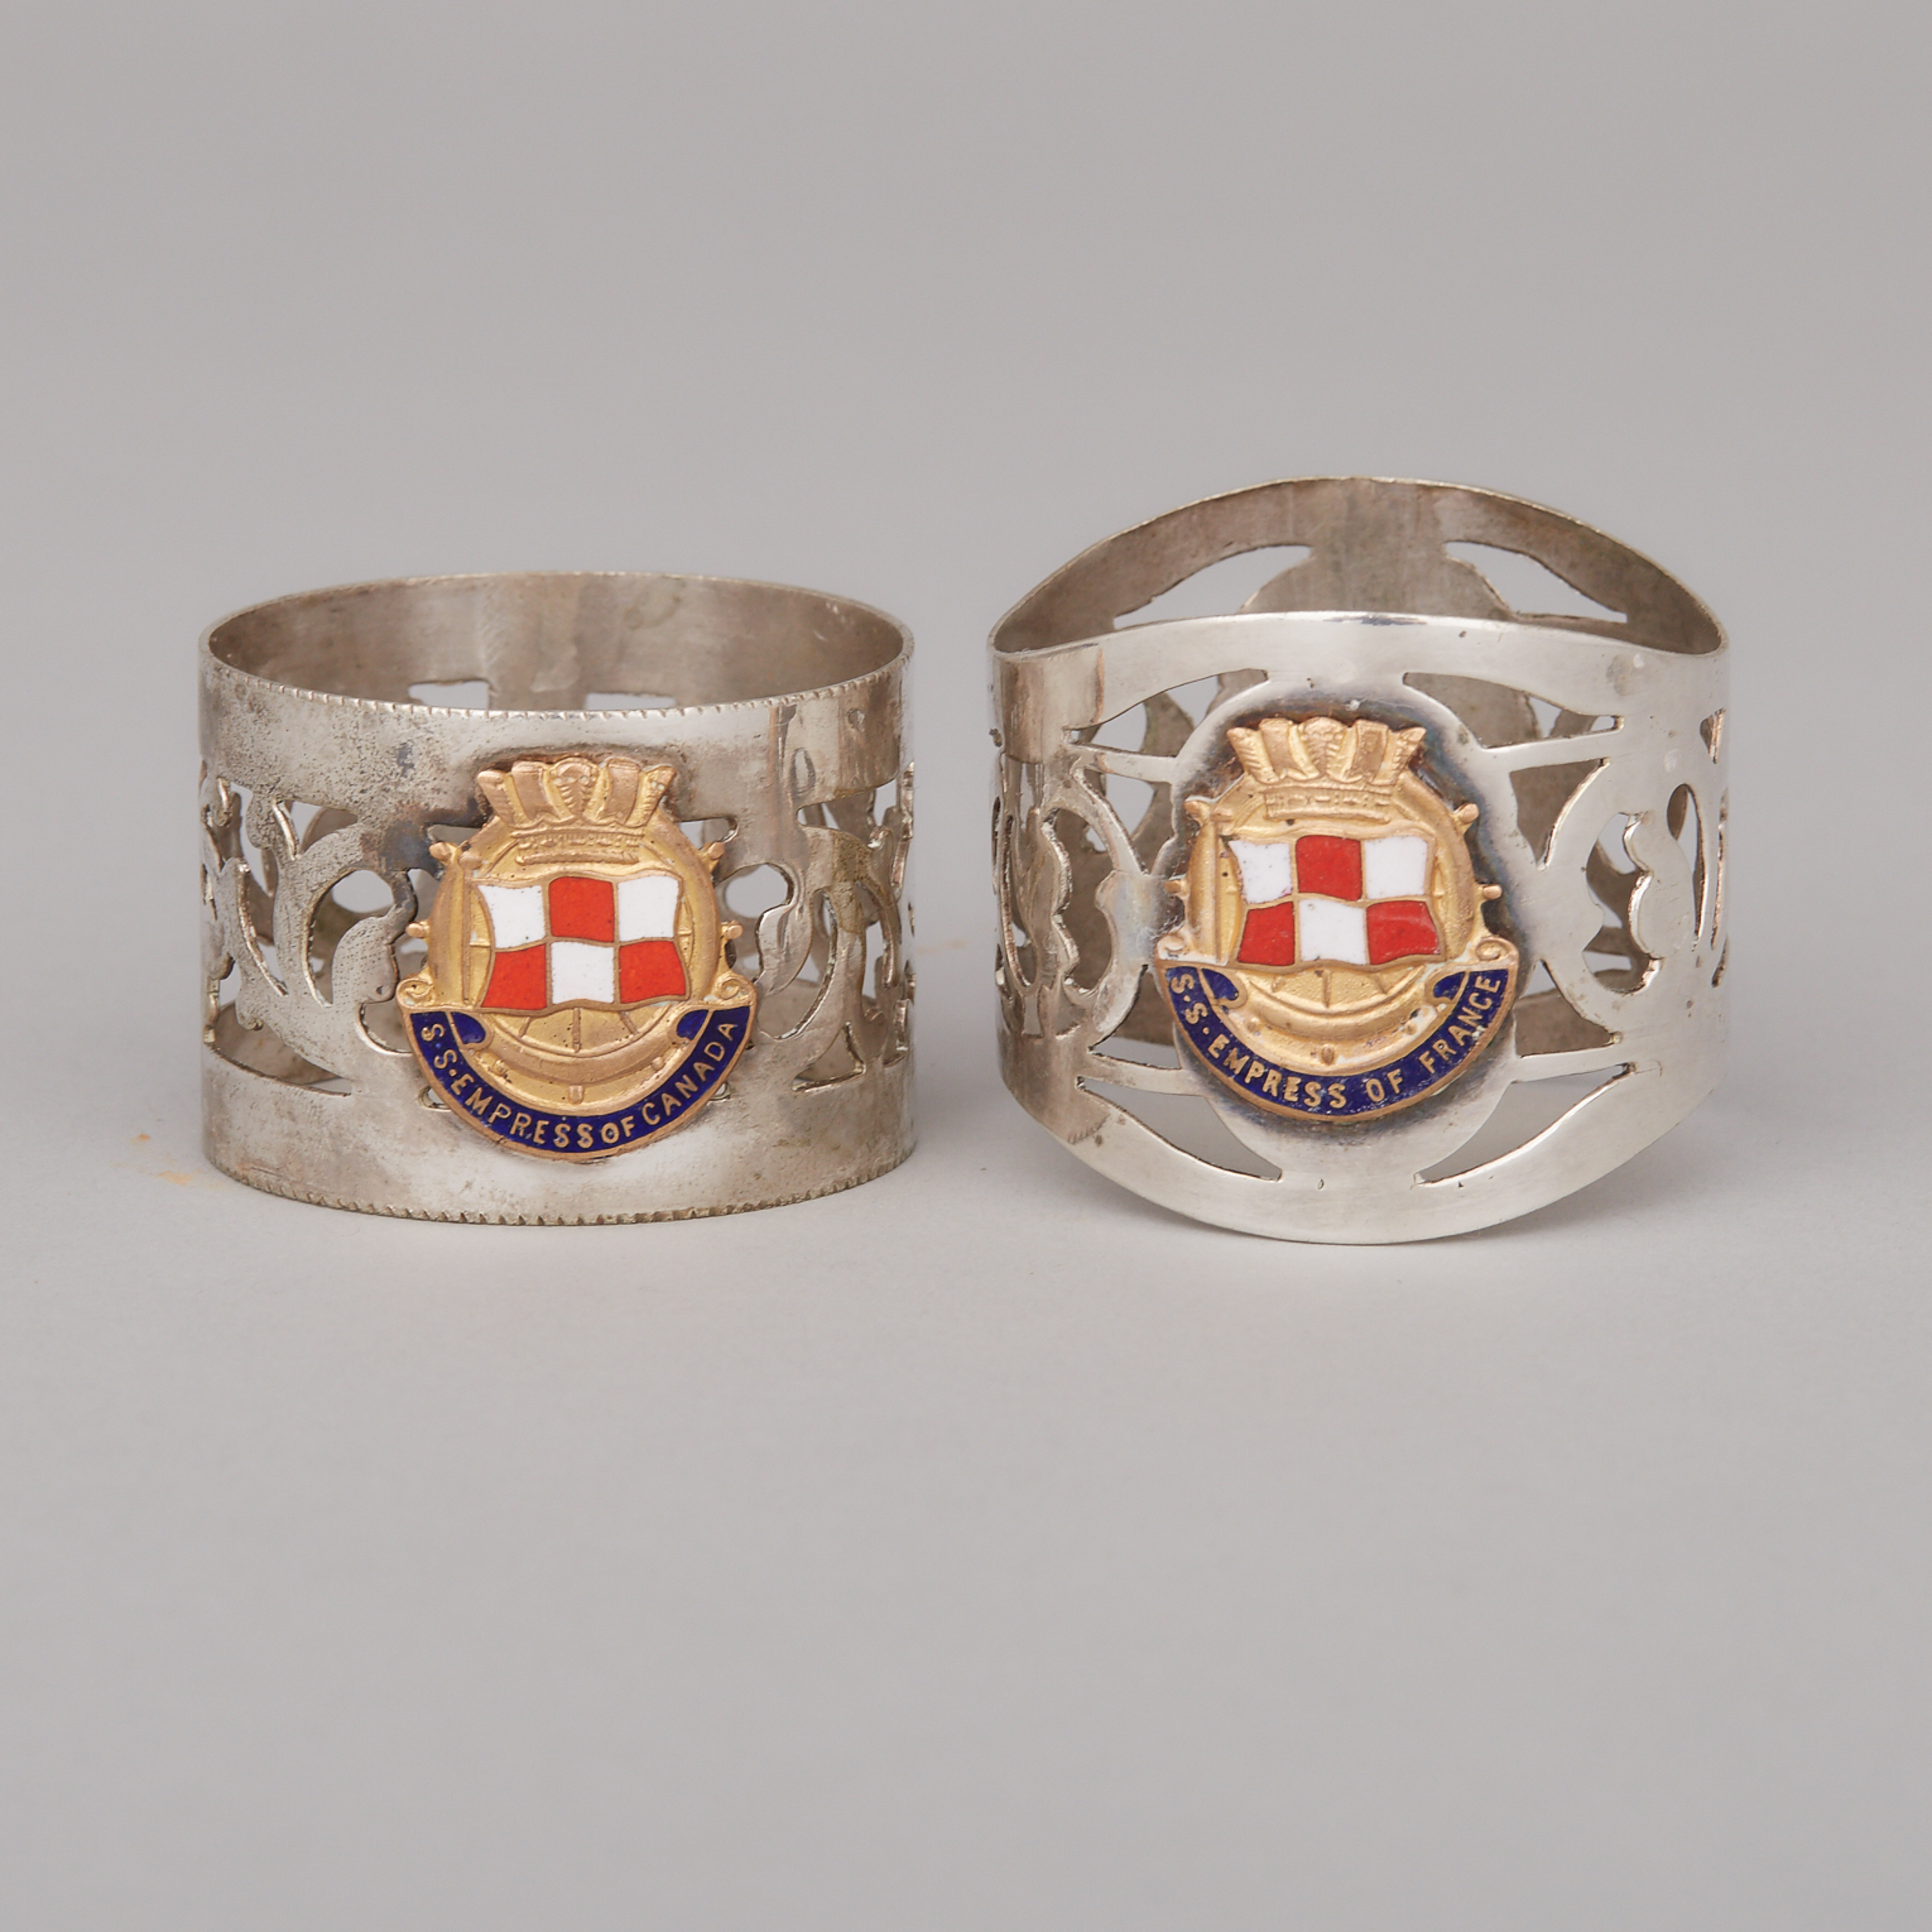 Two Canadian Pacific Steamships Ltd. Napkin Rings, 1948